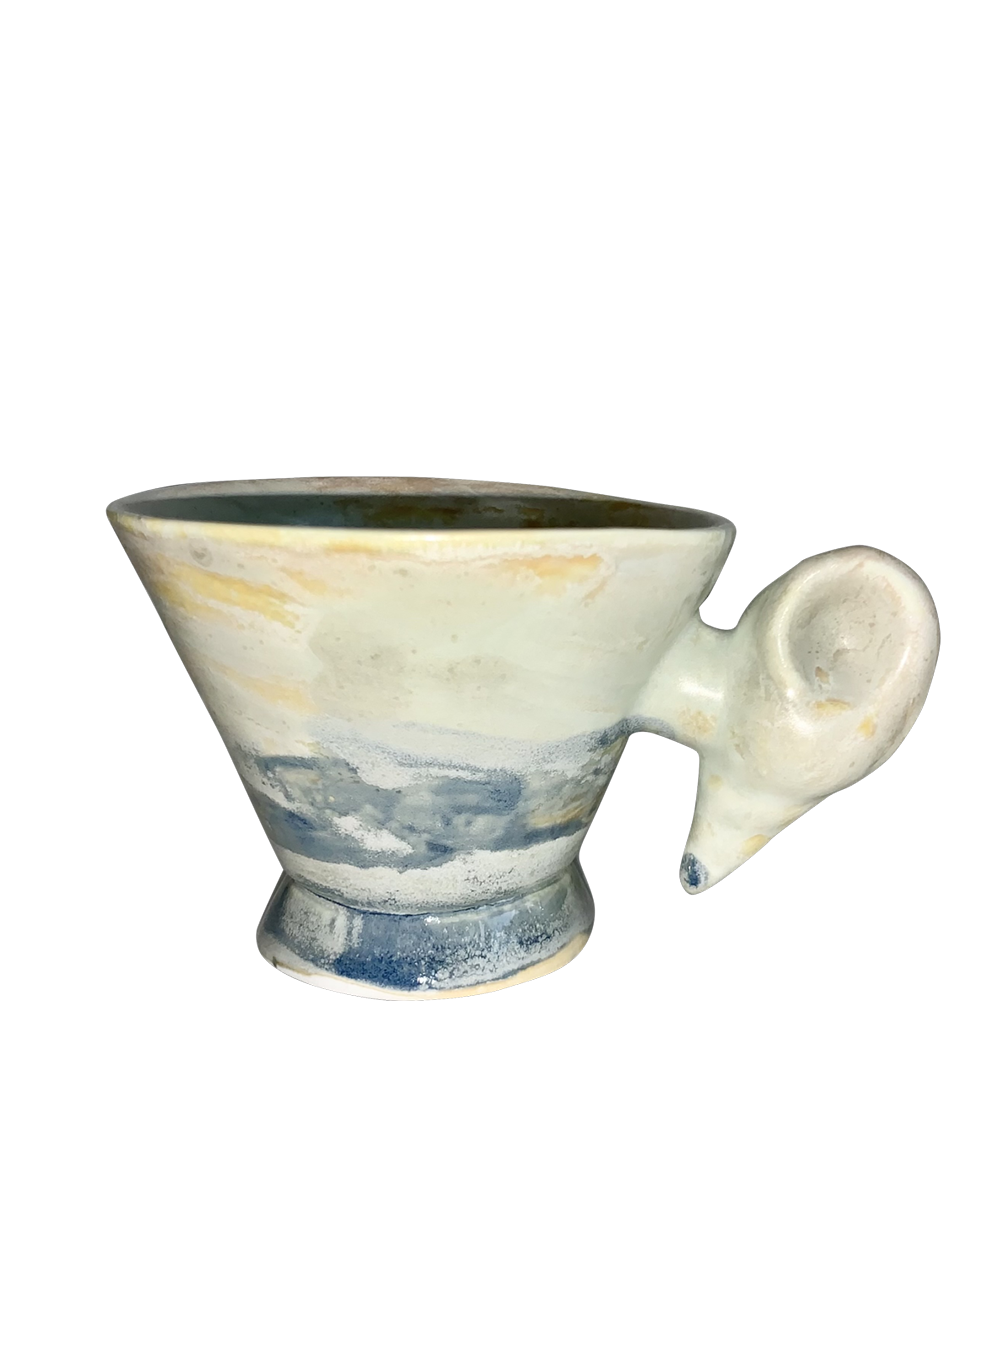 SNOW MOUNTAIN SHELL CUP